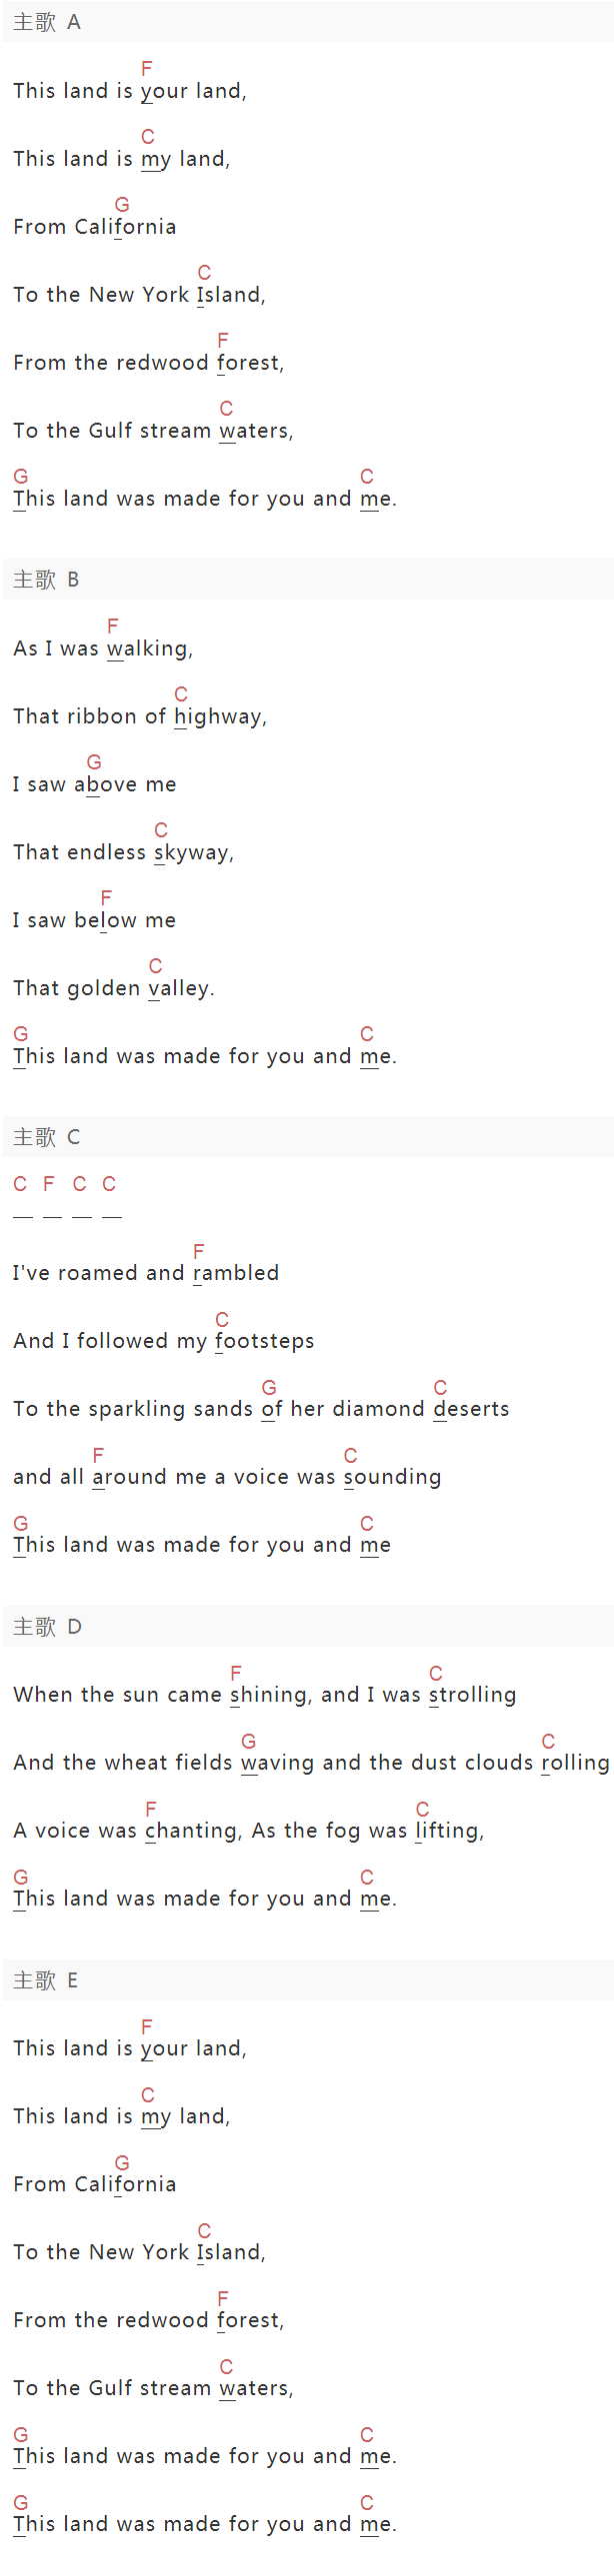 Woody Guthrie《This Land Is Your Land》吉他谱C调和弦谱(txt)1